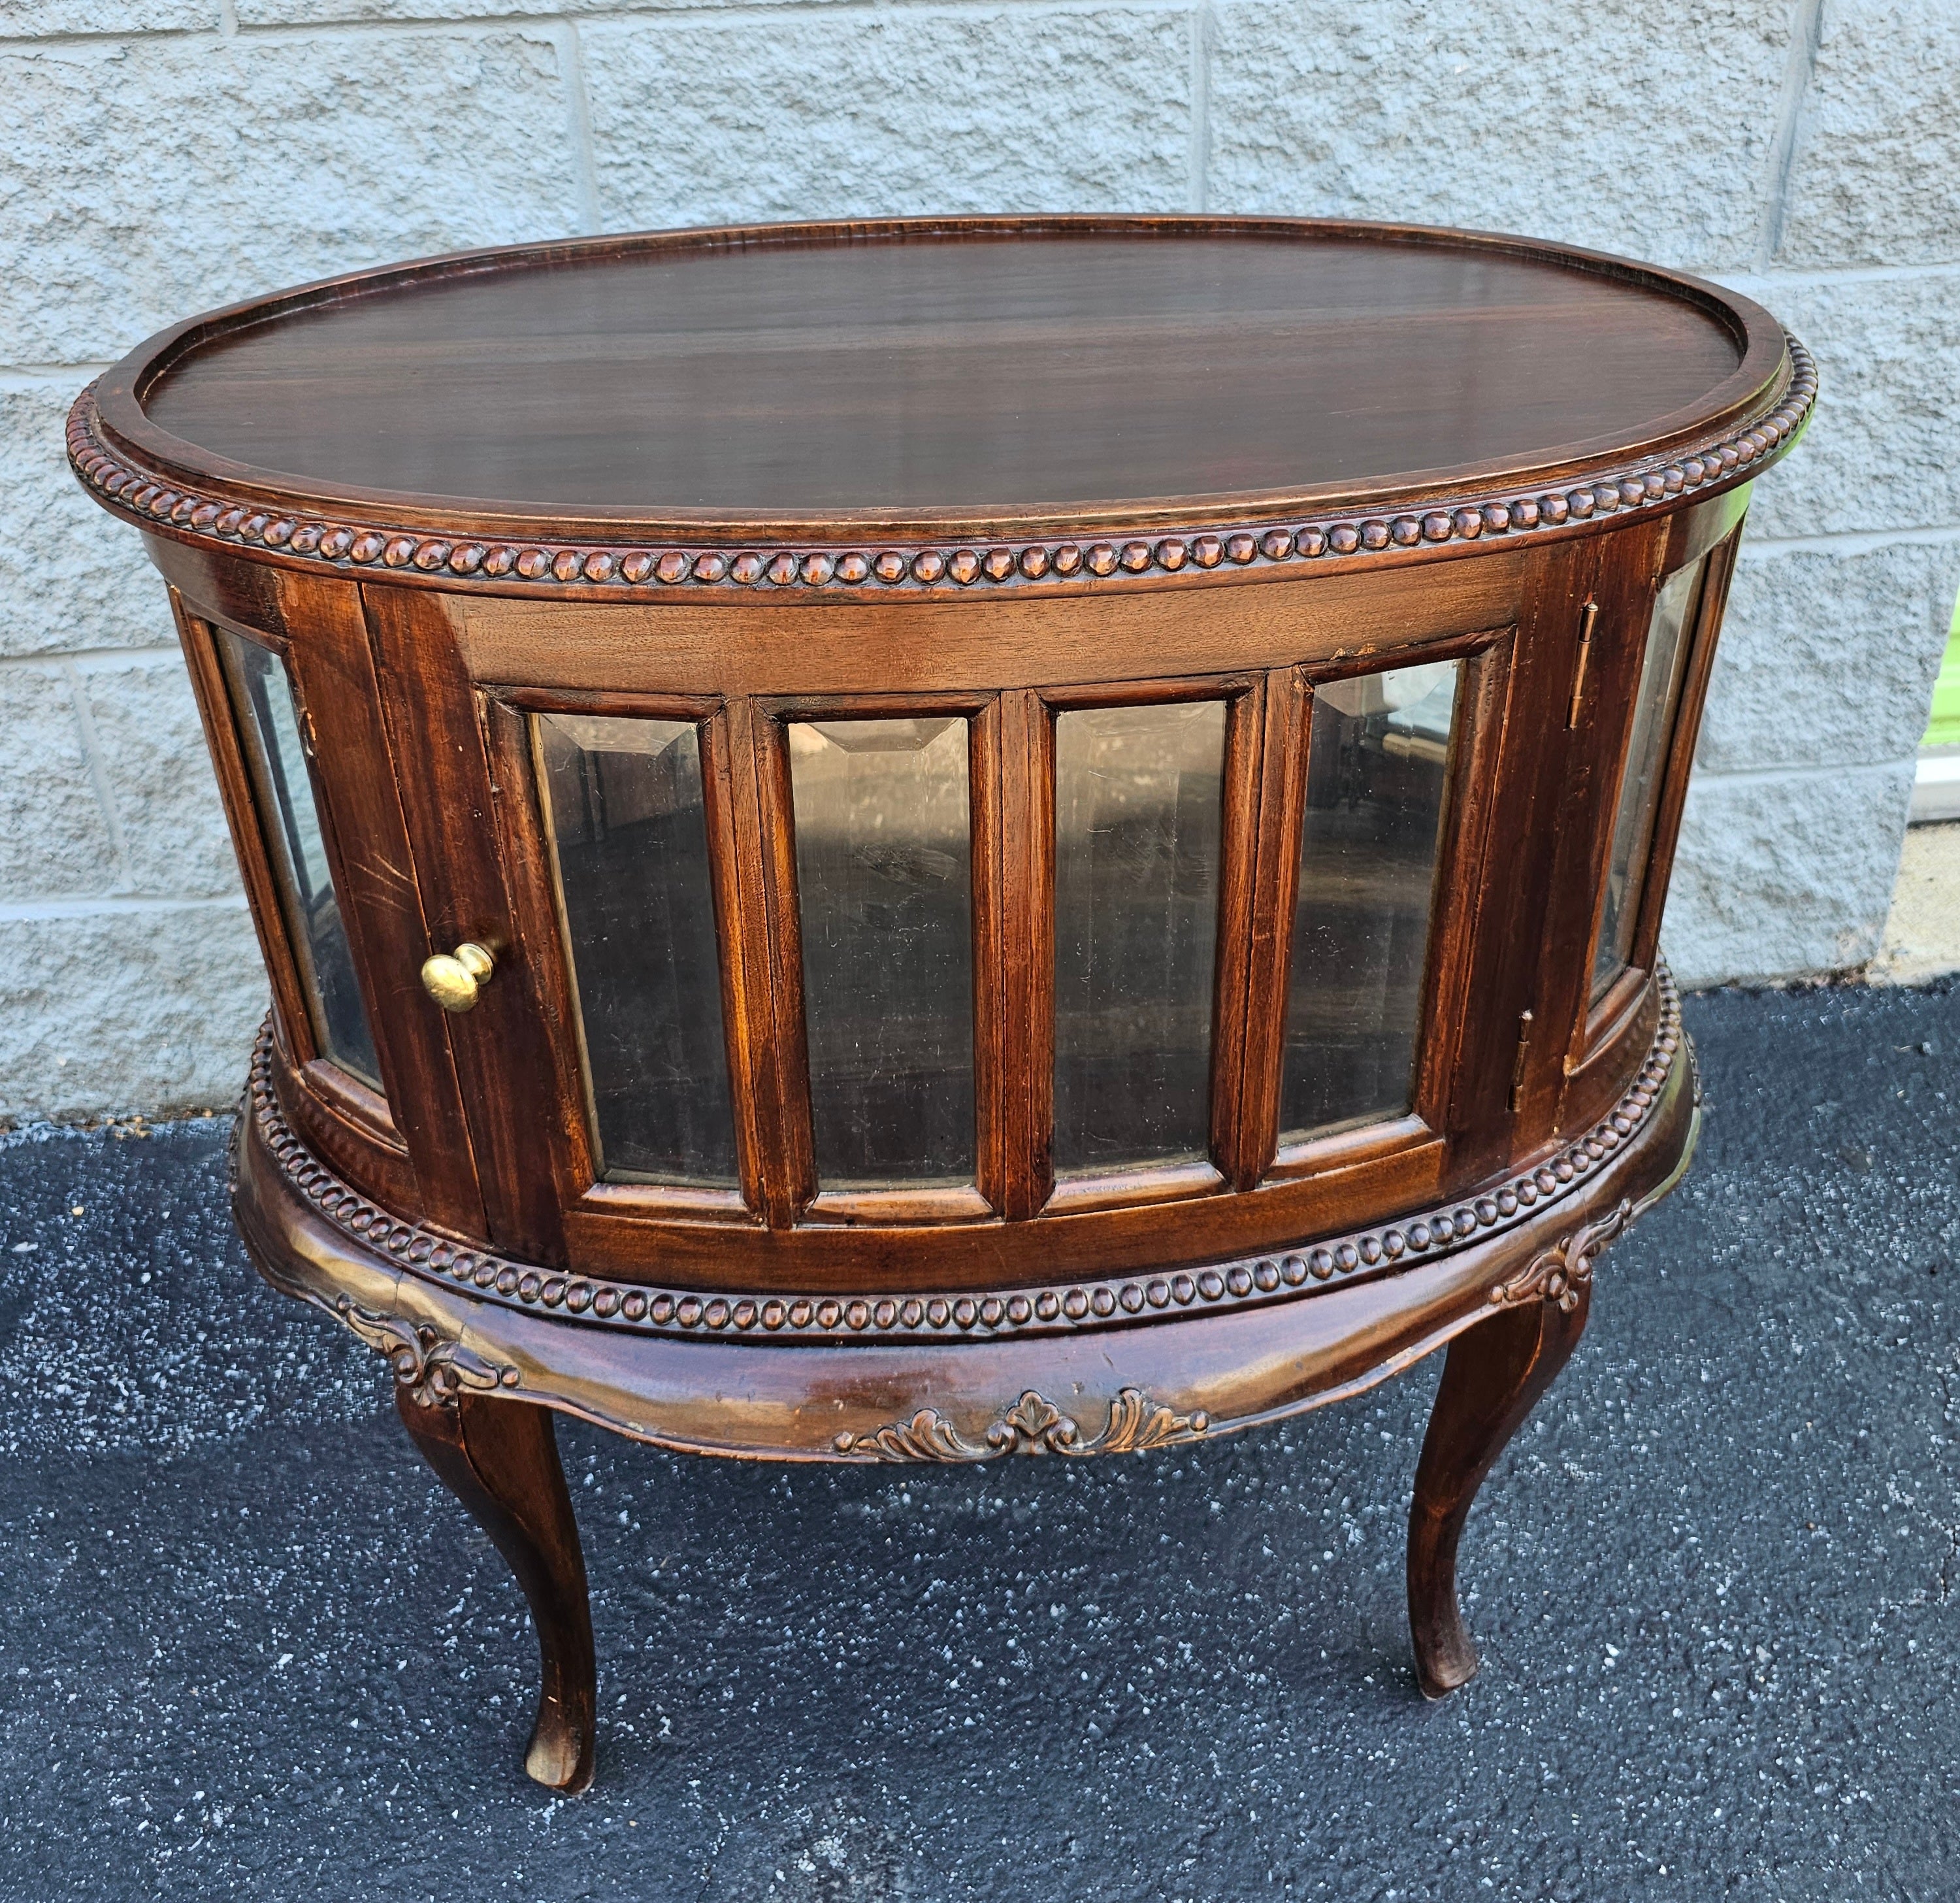 Mid-Century Queen Anne Style Mahogany Double Door Oval Vitrine Table.
Measures 29